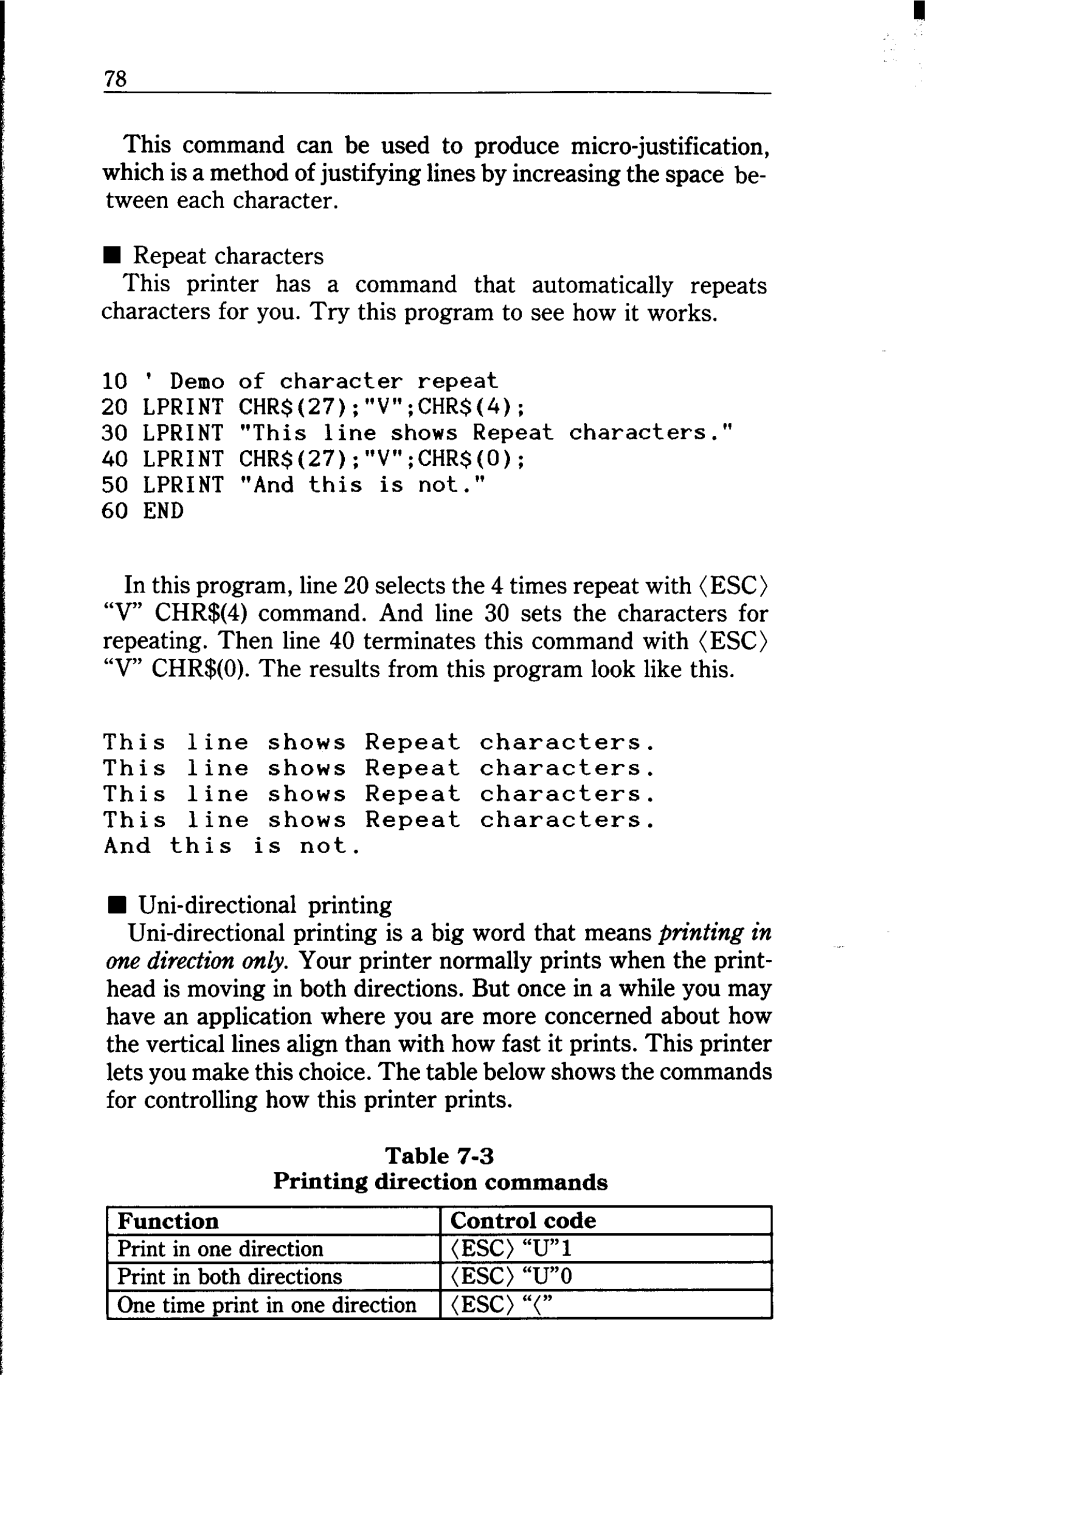 Star Micronics NB-15 user manual This command can be used to produce micro-justification 